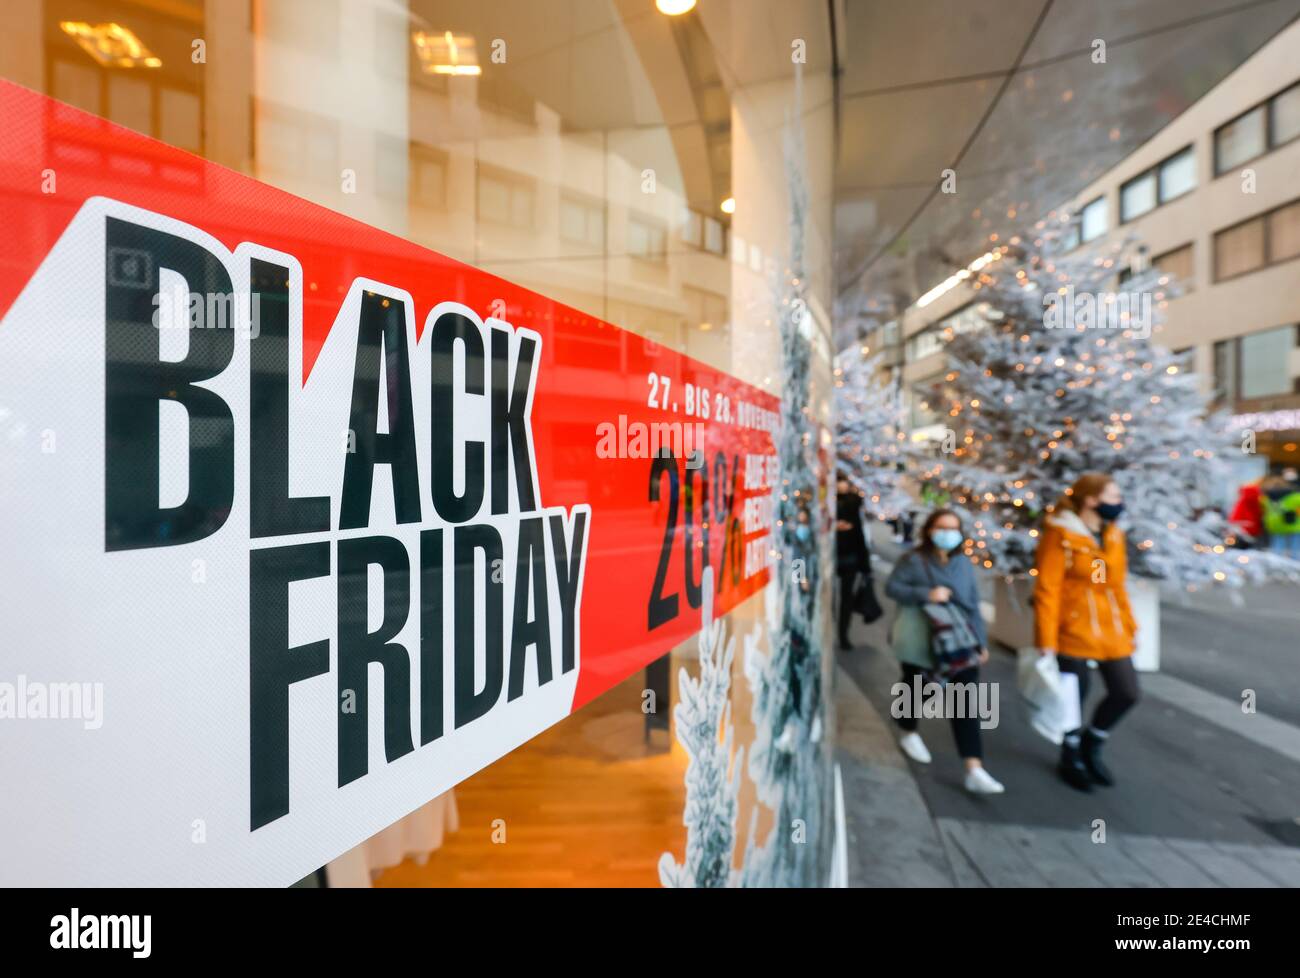 Duesseldorf, North Rhine-Westphalia, Germany - Black Friday, Duesseldorf city center in times of the corona crisis during the second part of lockdown, passers-by with protective masks when shopping on Black Friday weekend in the pedestrian zone decorated for Christmas. Stock Photo